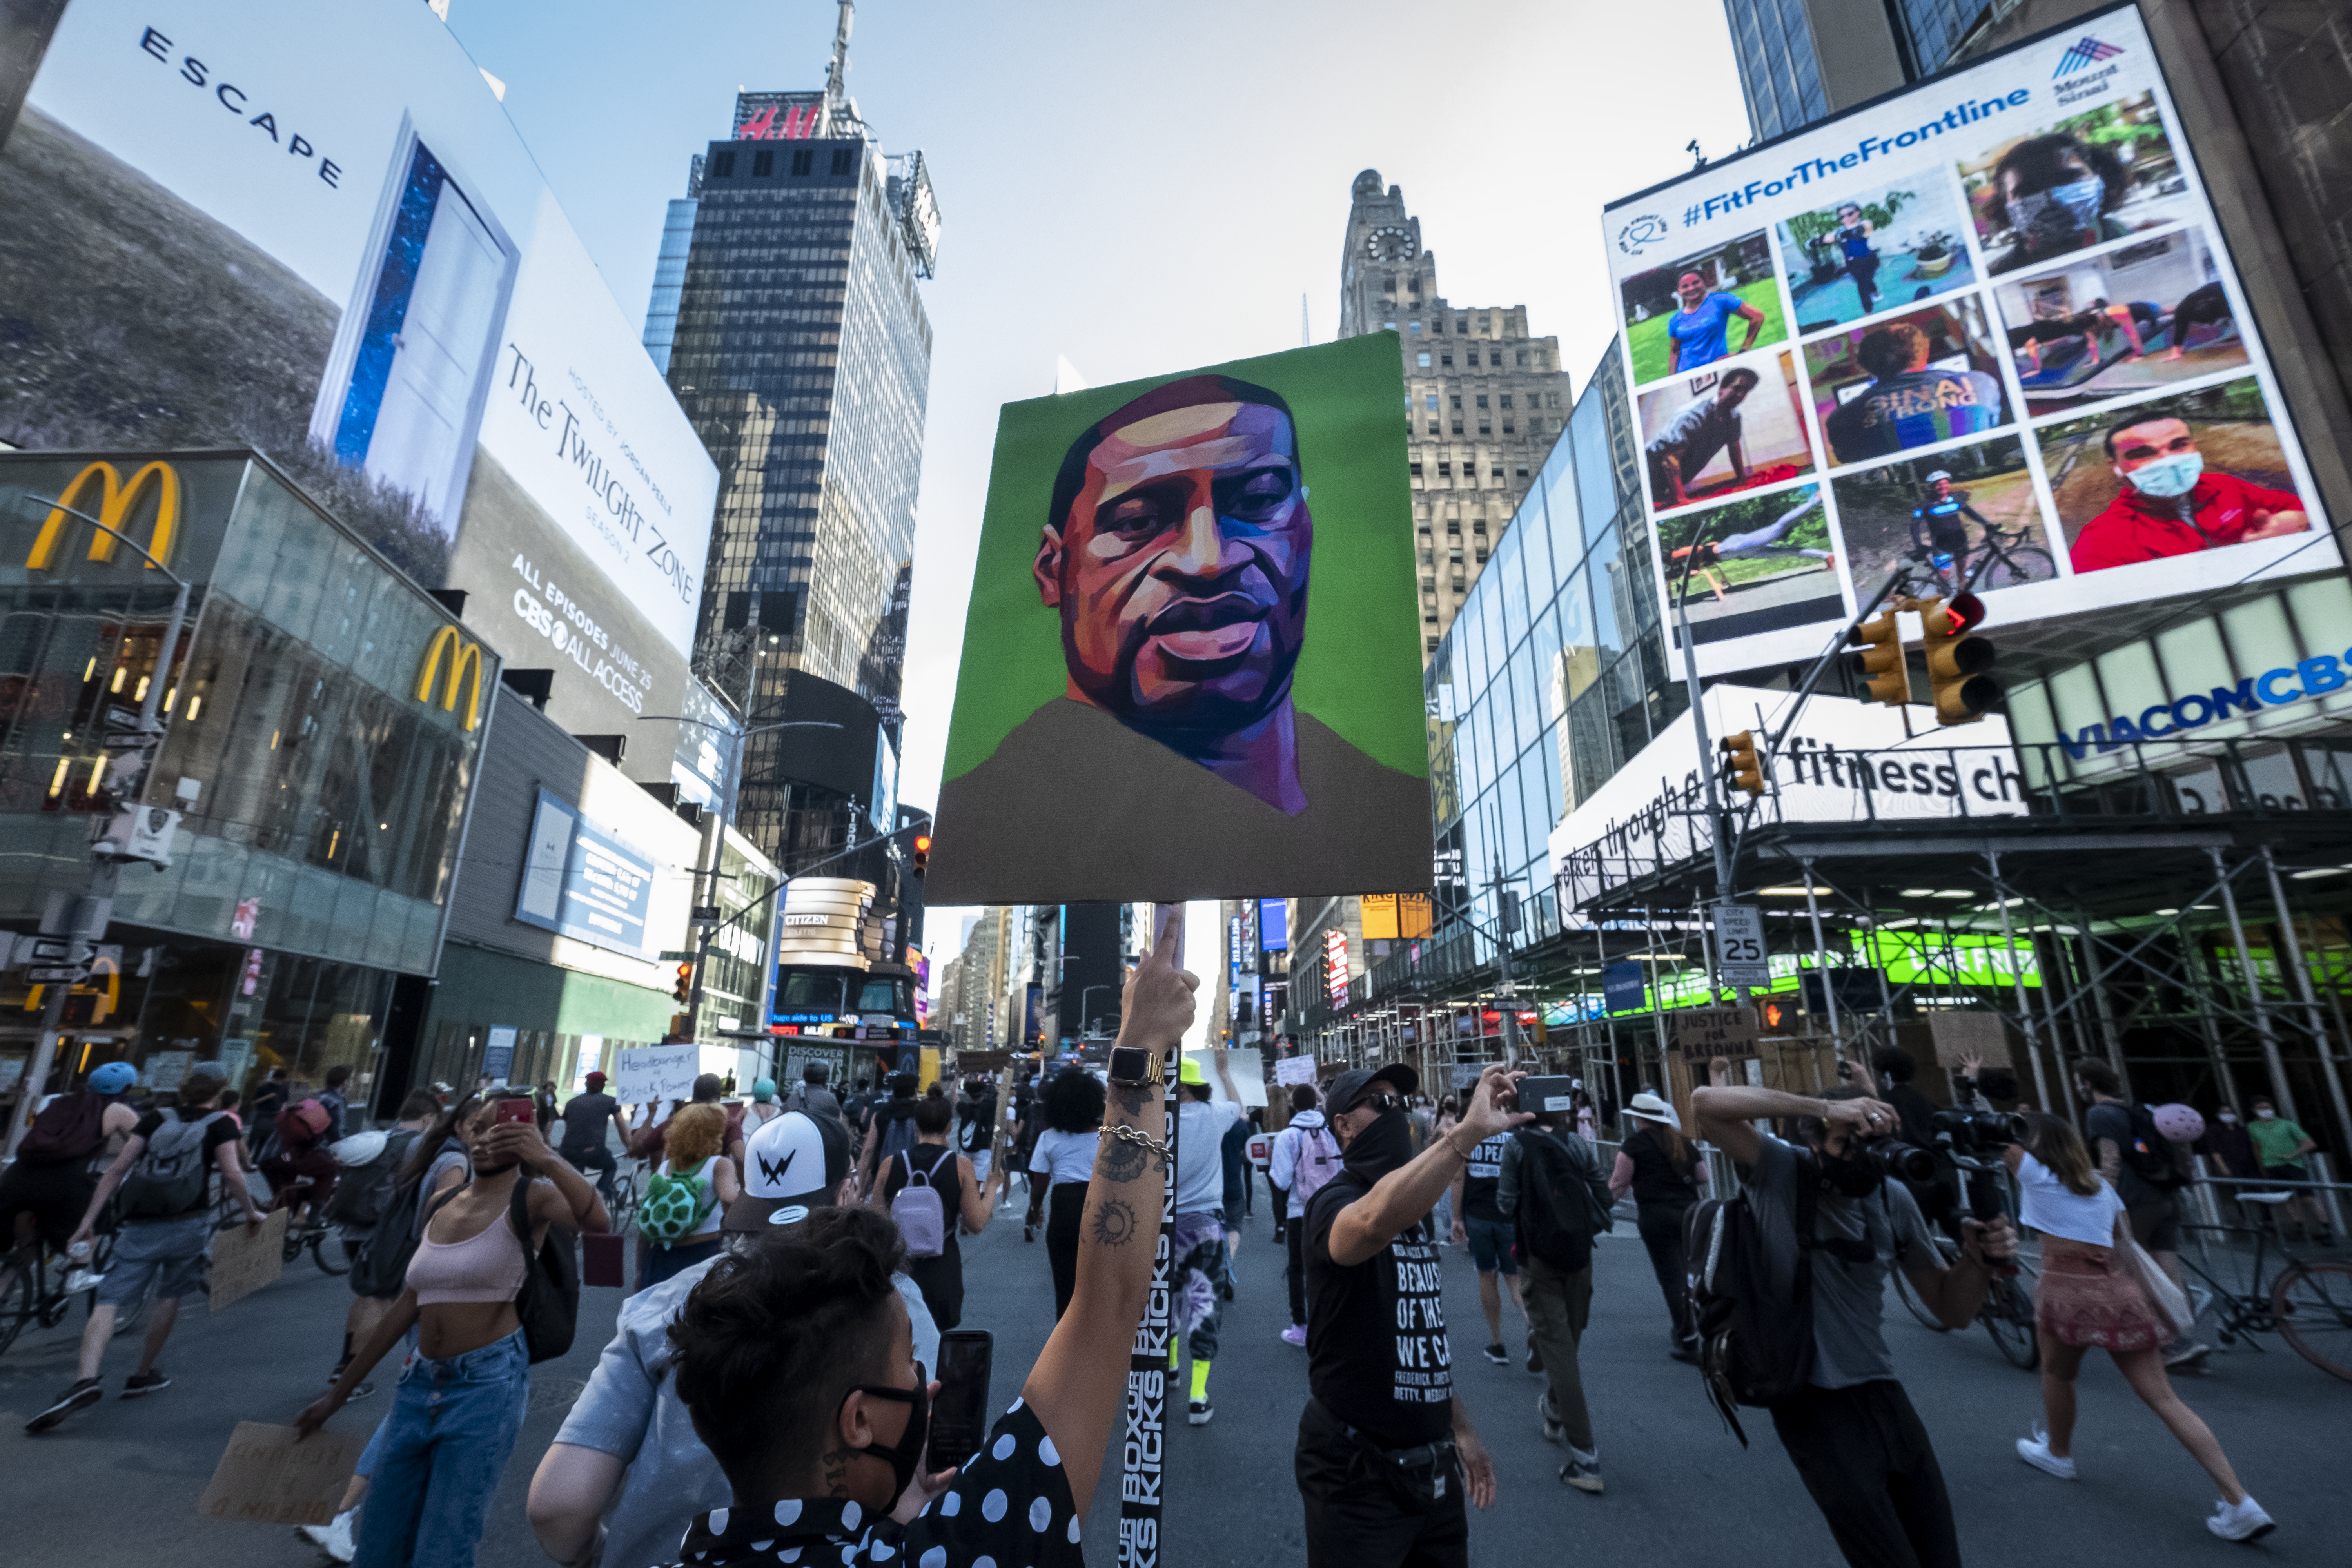 Protesters wearing masks walk through the streets of Times Square holding up their hands and chanting, “Hands Up Don’t Shoot” after police officers conceded to let protesters that are trying to peacefully march through Times Square with one protester holding a sign with a portrait painting of George Floyd.